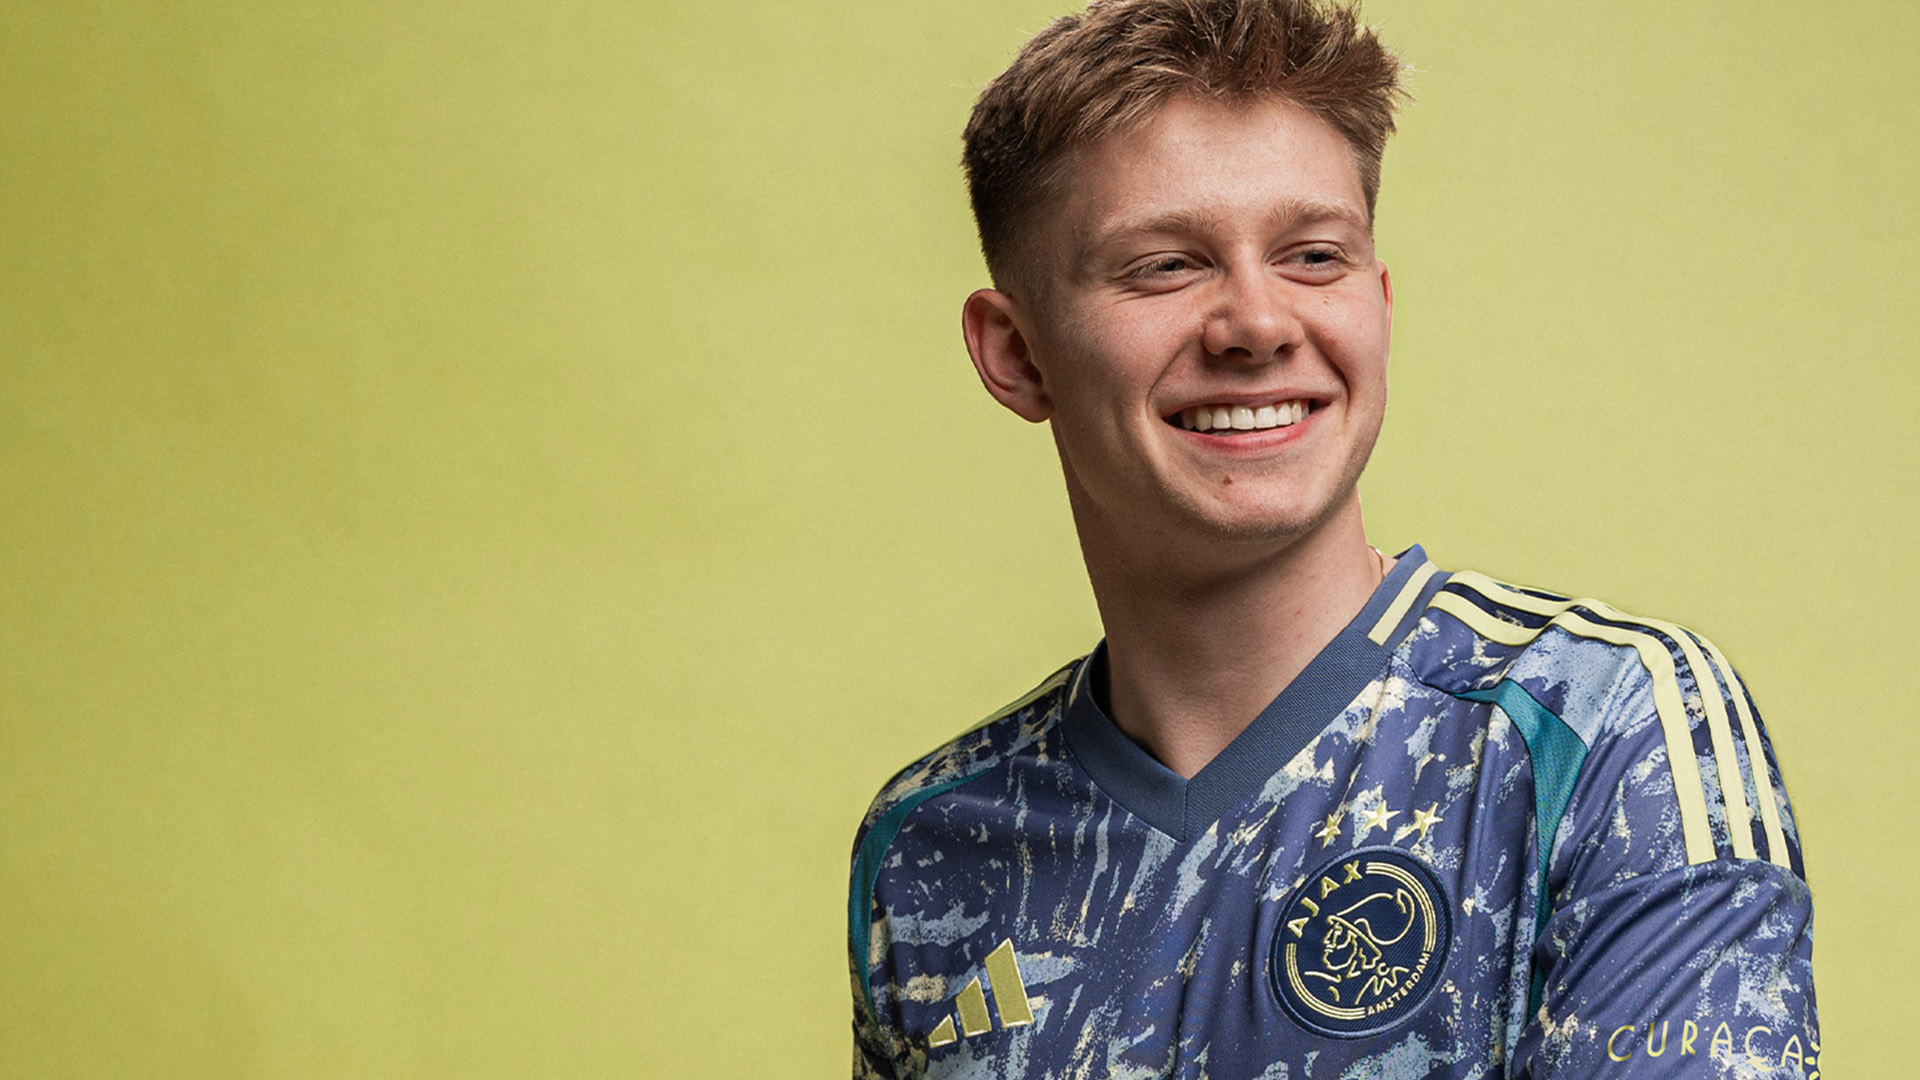 Ajax launches new away kit